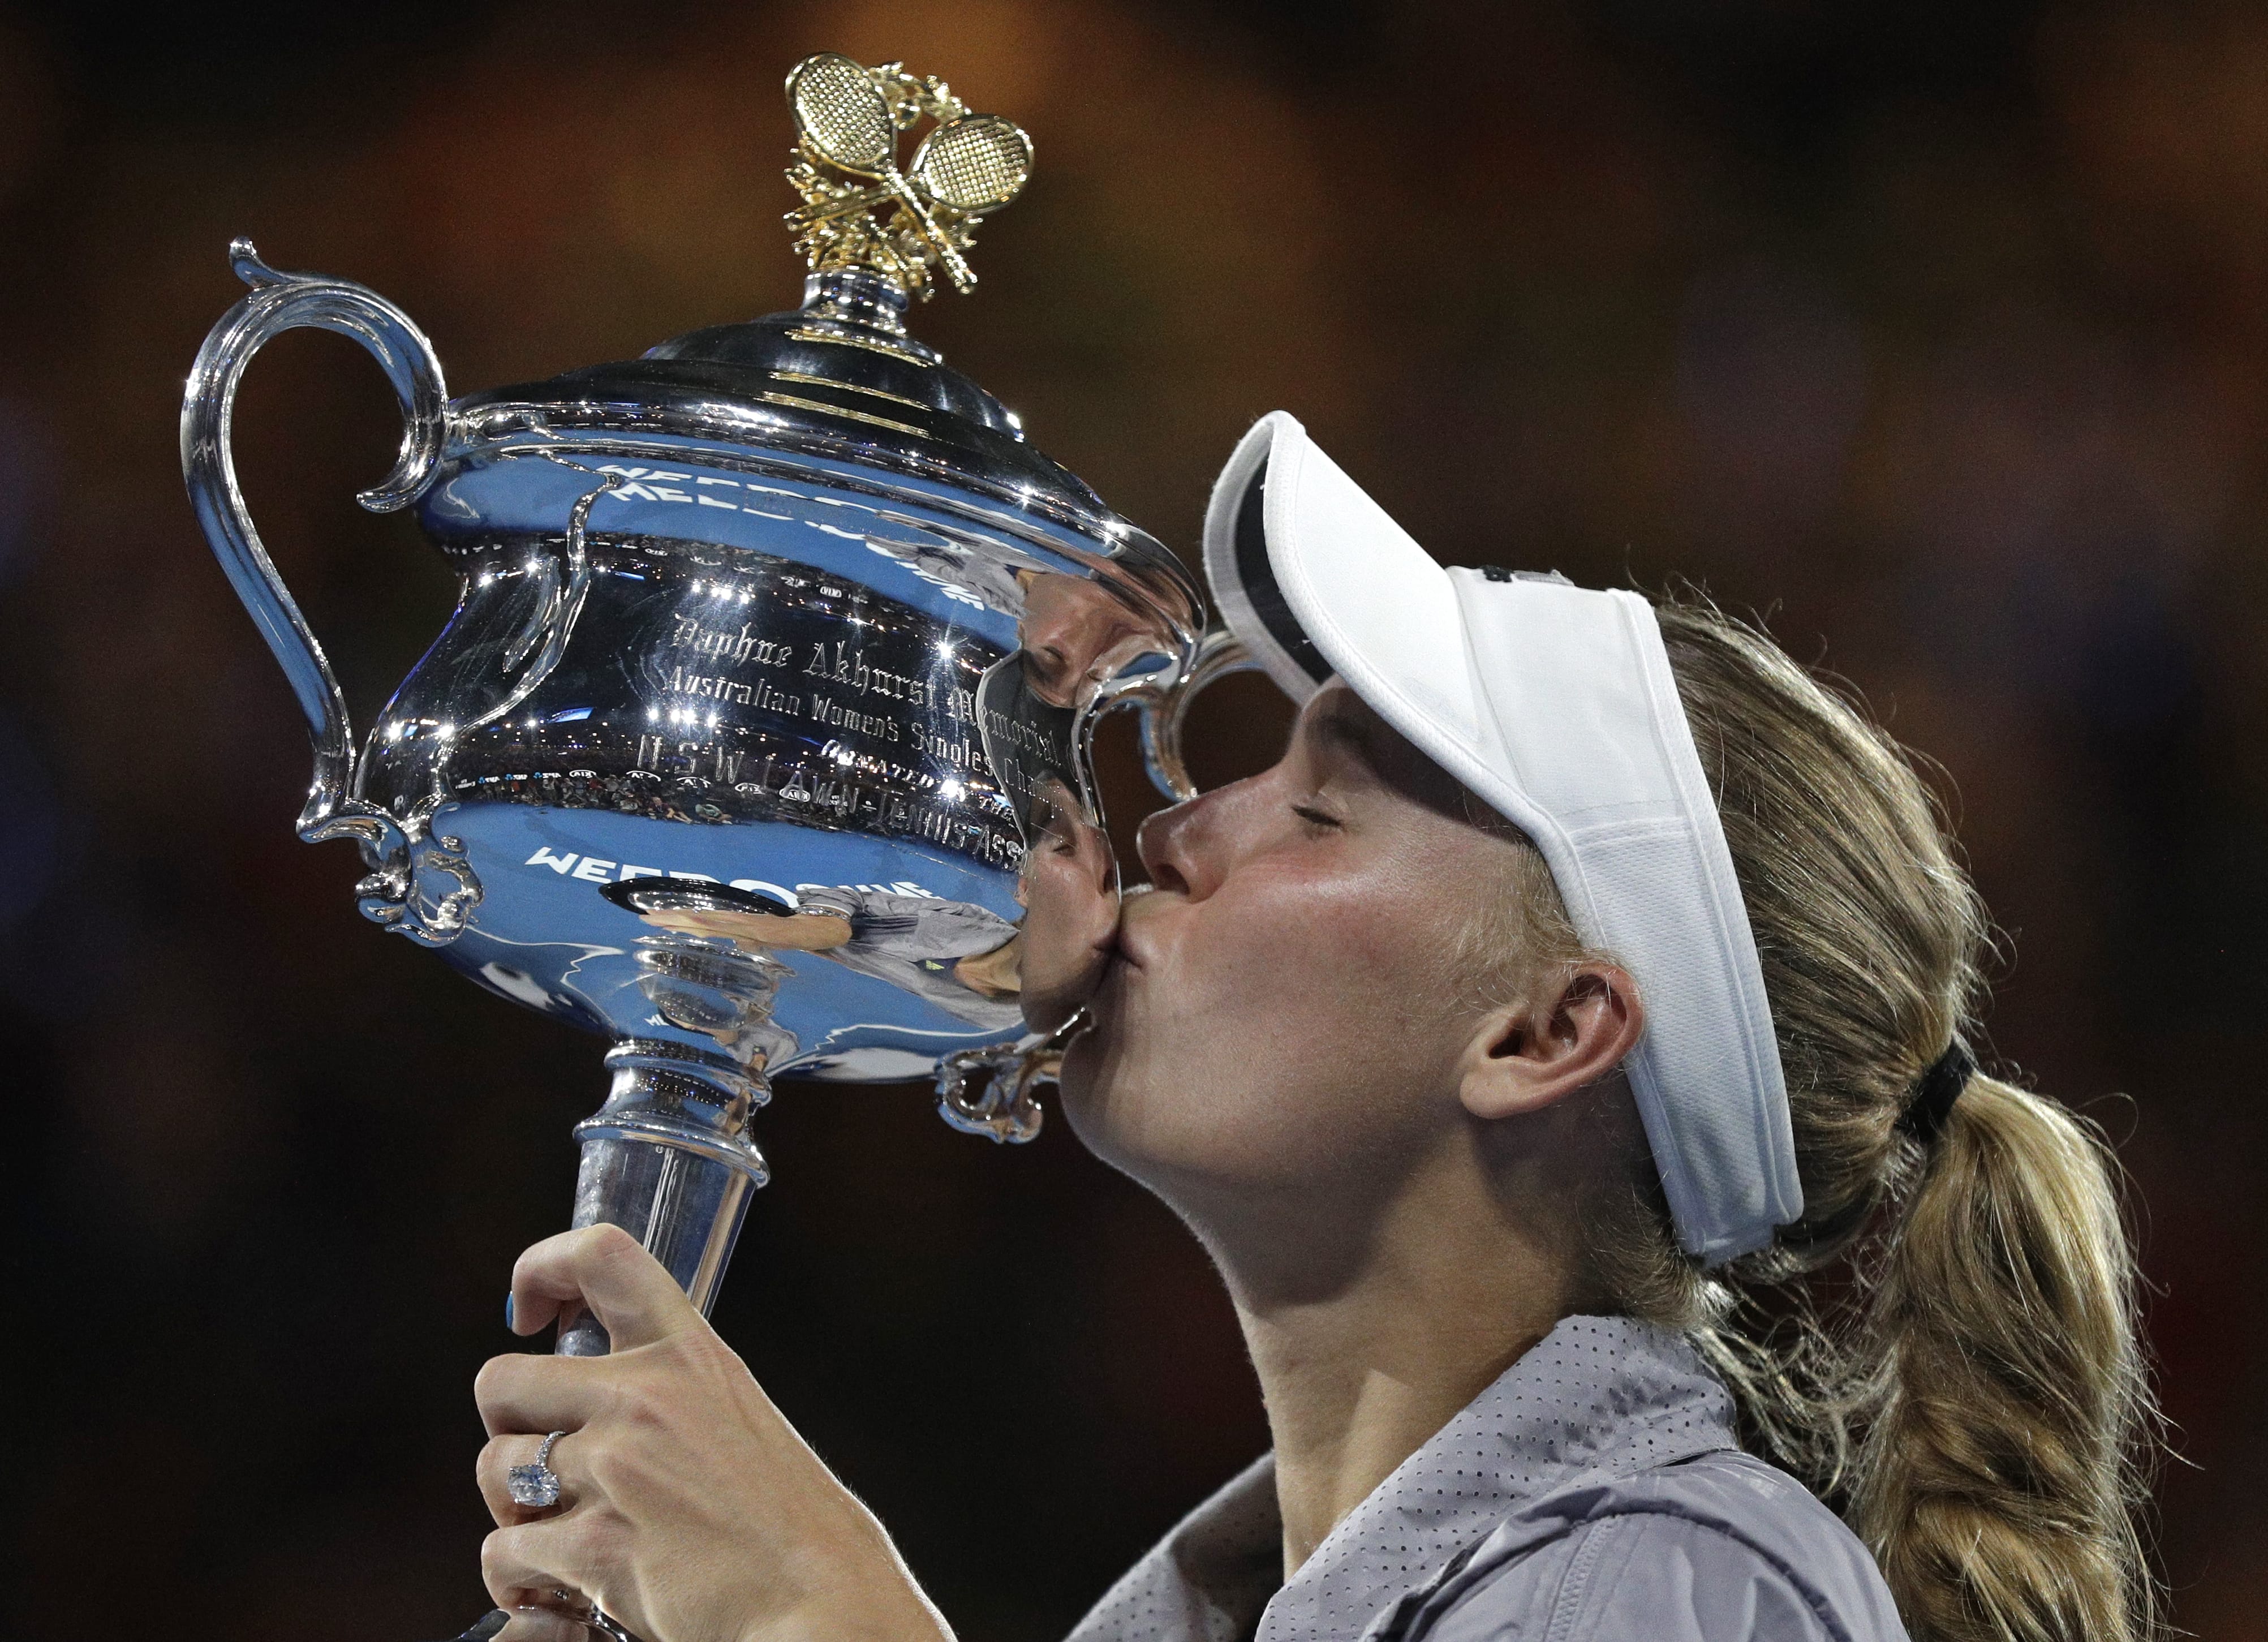 Denmark's Caroline Wozniacki kisses her trophy after defeating Romania's Simona Halep during the women's singles final at the Australian Open tennis championships in Melbourne, Australia, Saturday, Jan. 27, 2018.